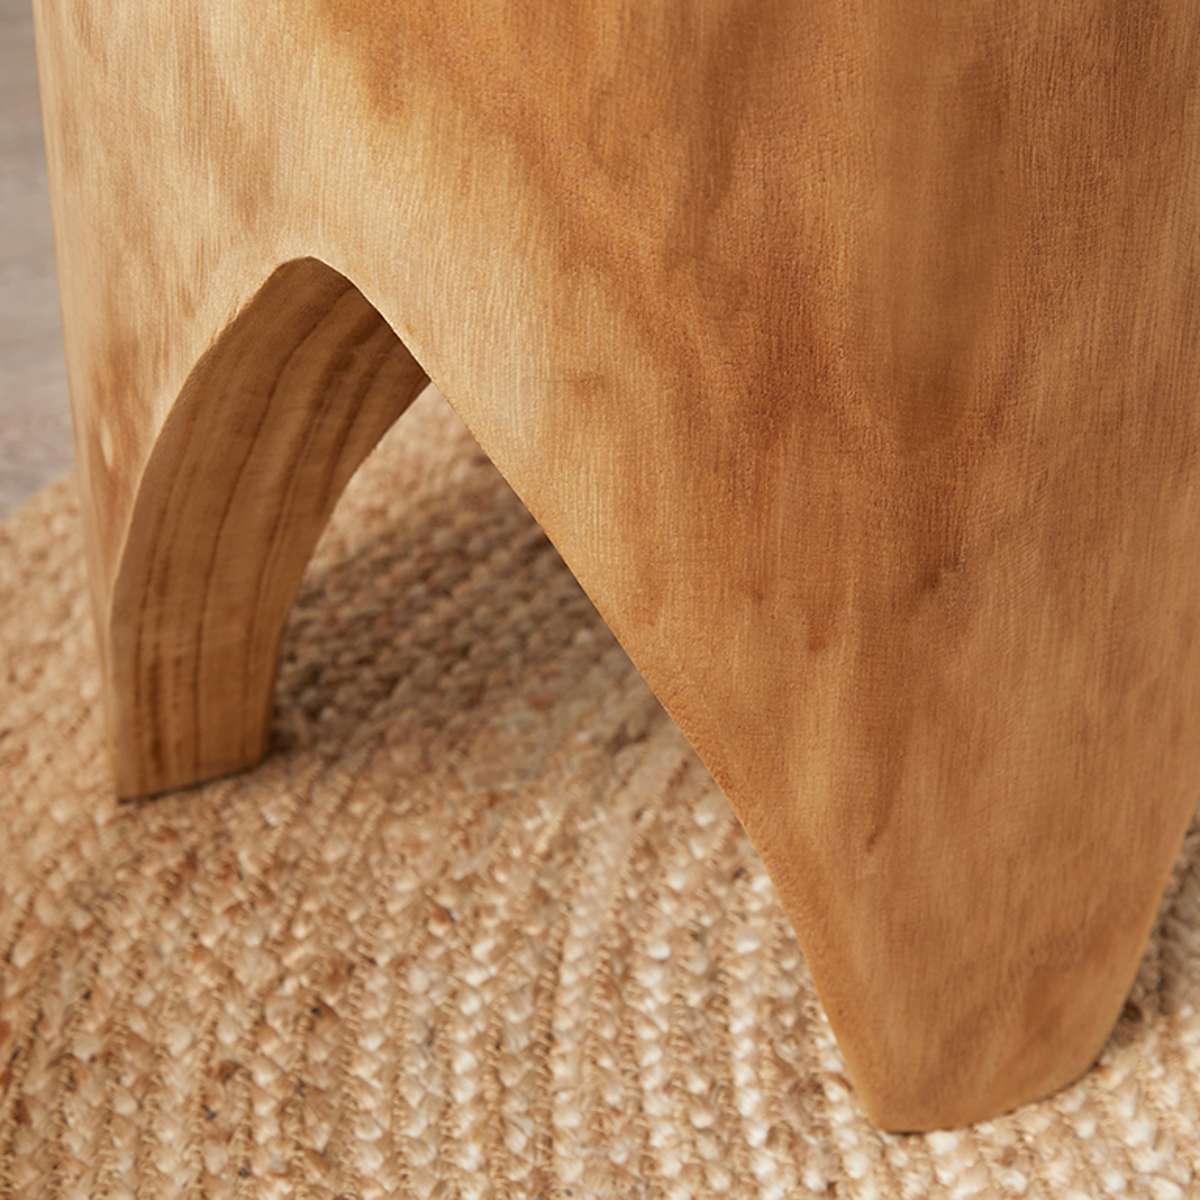 Zeus Wooden Side Table - Natural